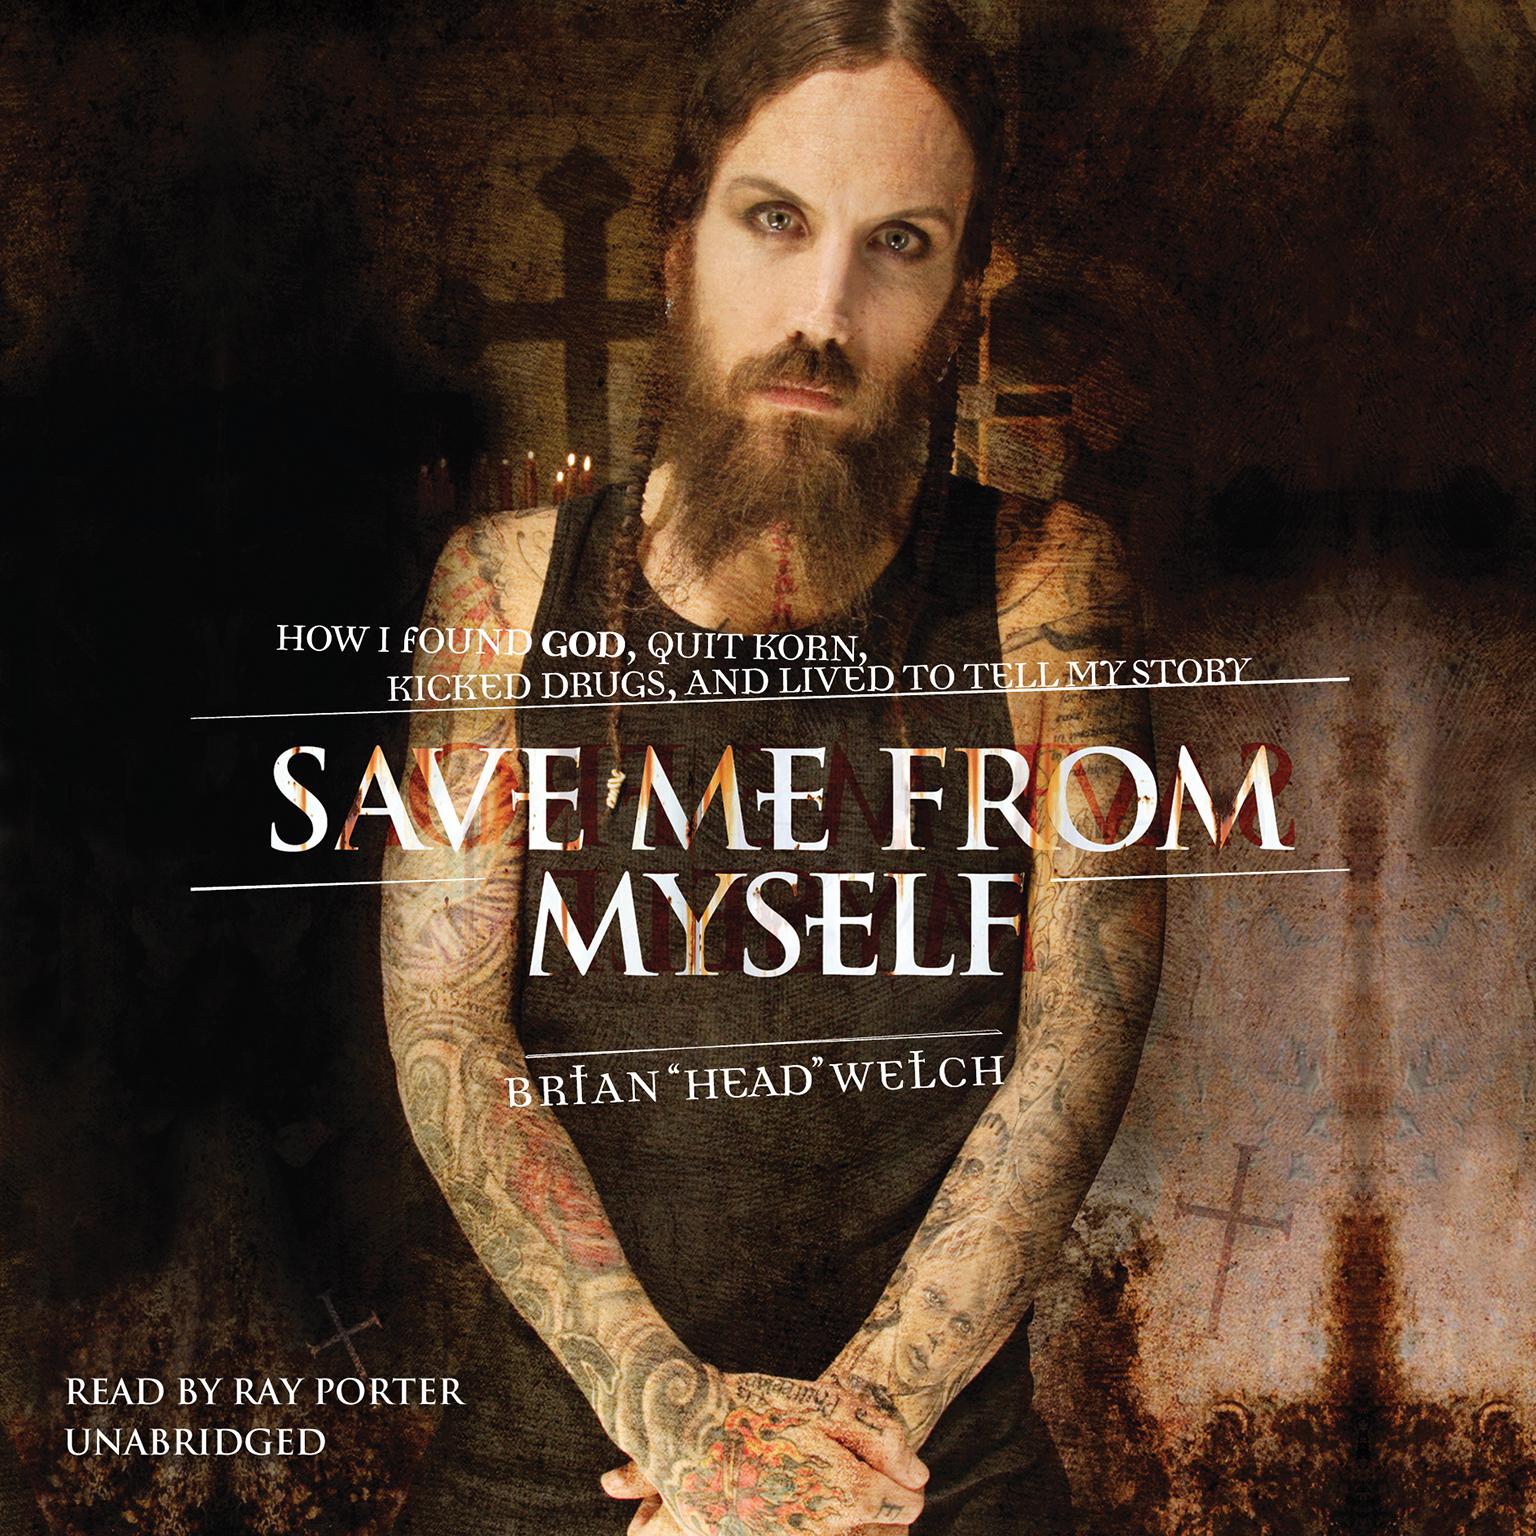 Save Me from Myself: How I Found God, Quit Korn, Kicked Drugs, and Lived to Tell My Story Audiobook, by Brian (Head) Welch